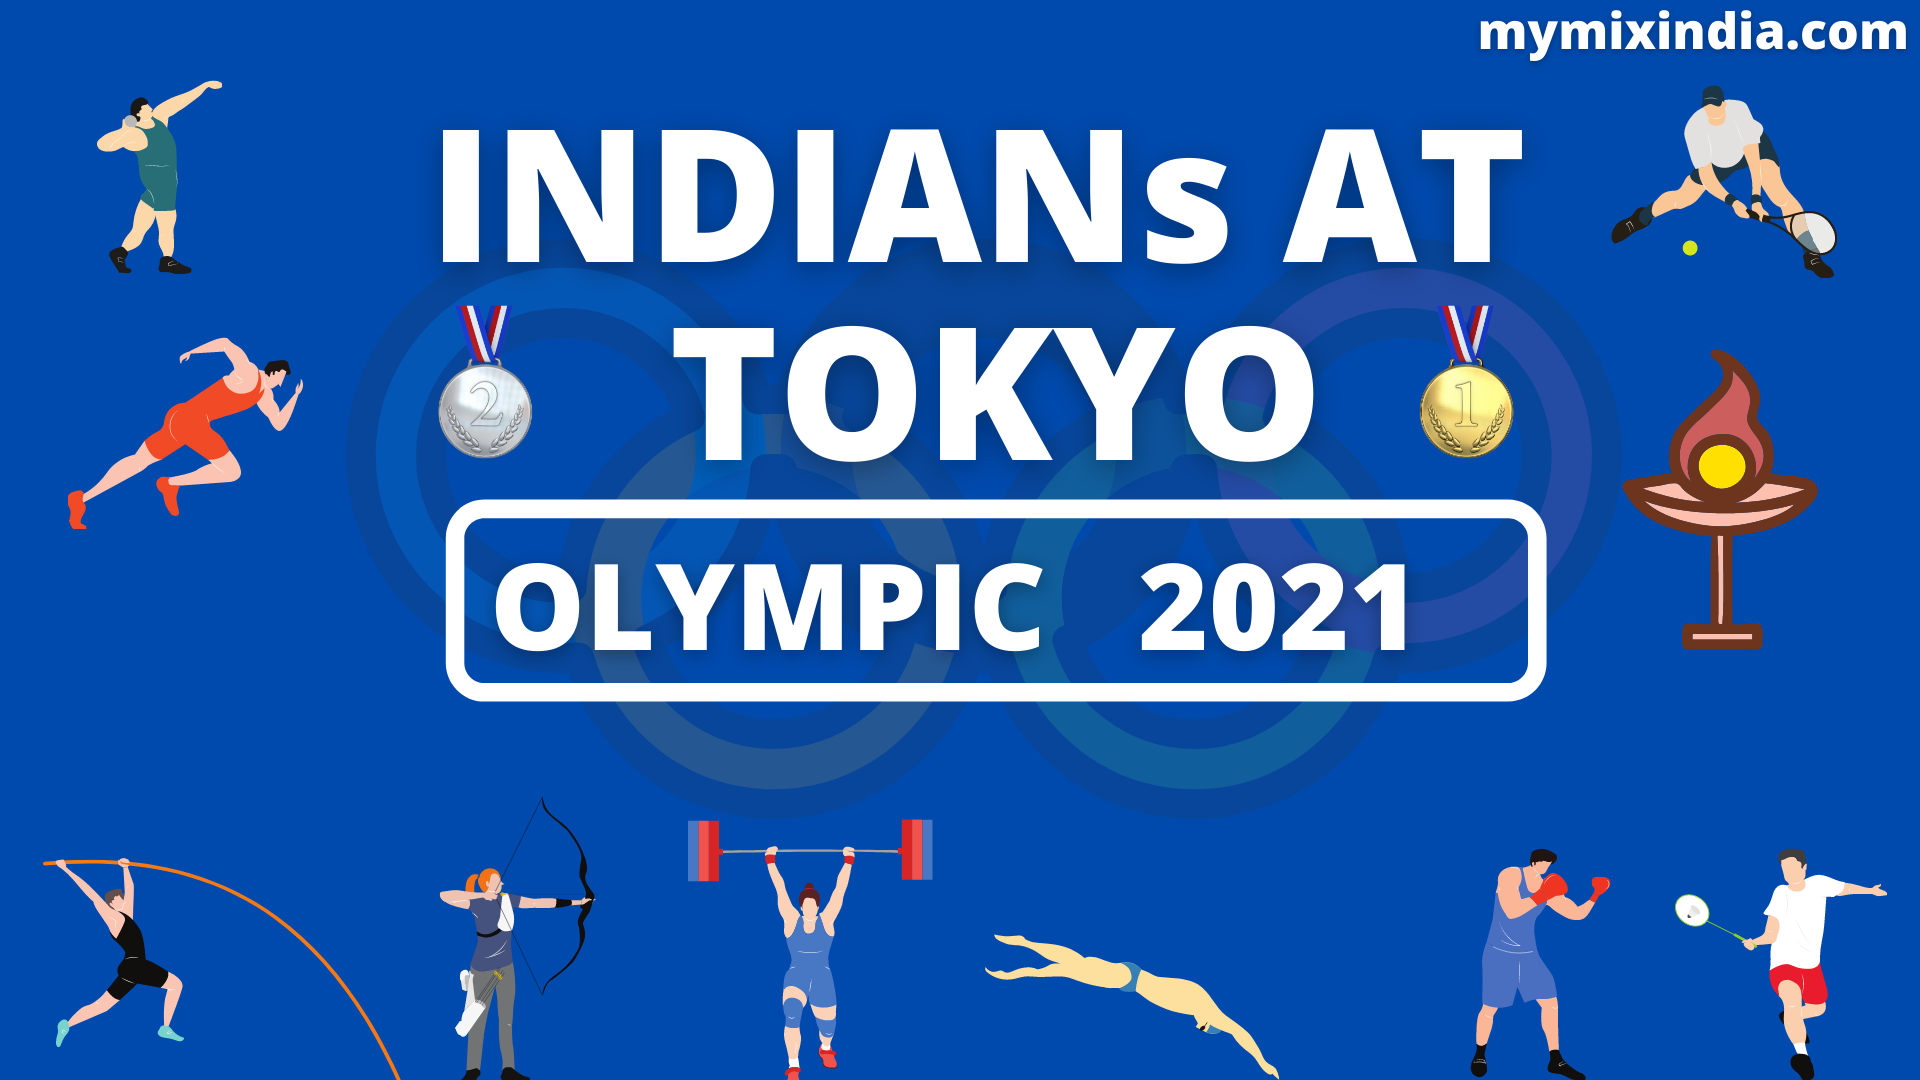 Indians at tokyo olympic 2021